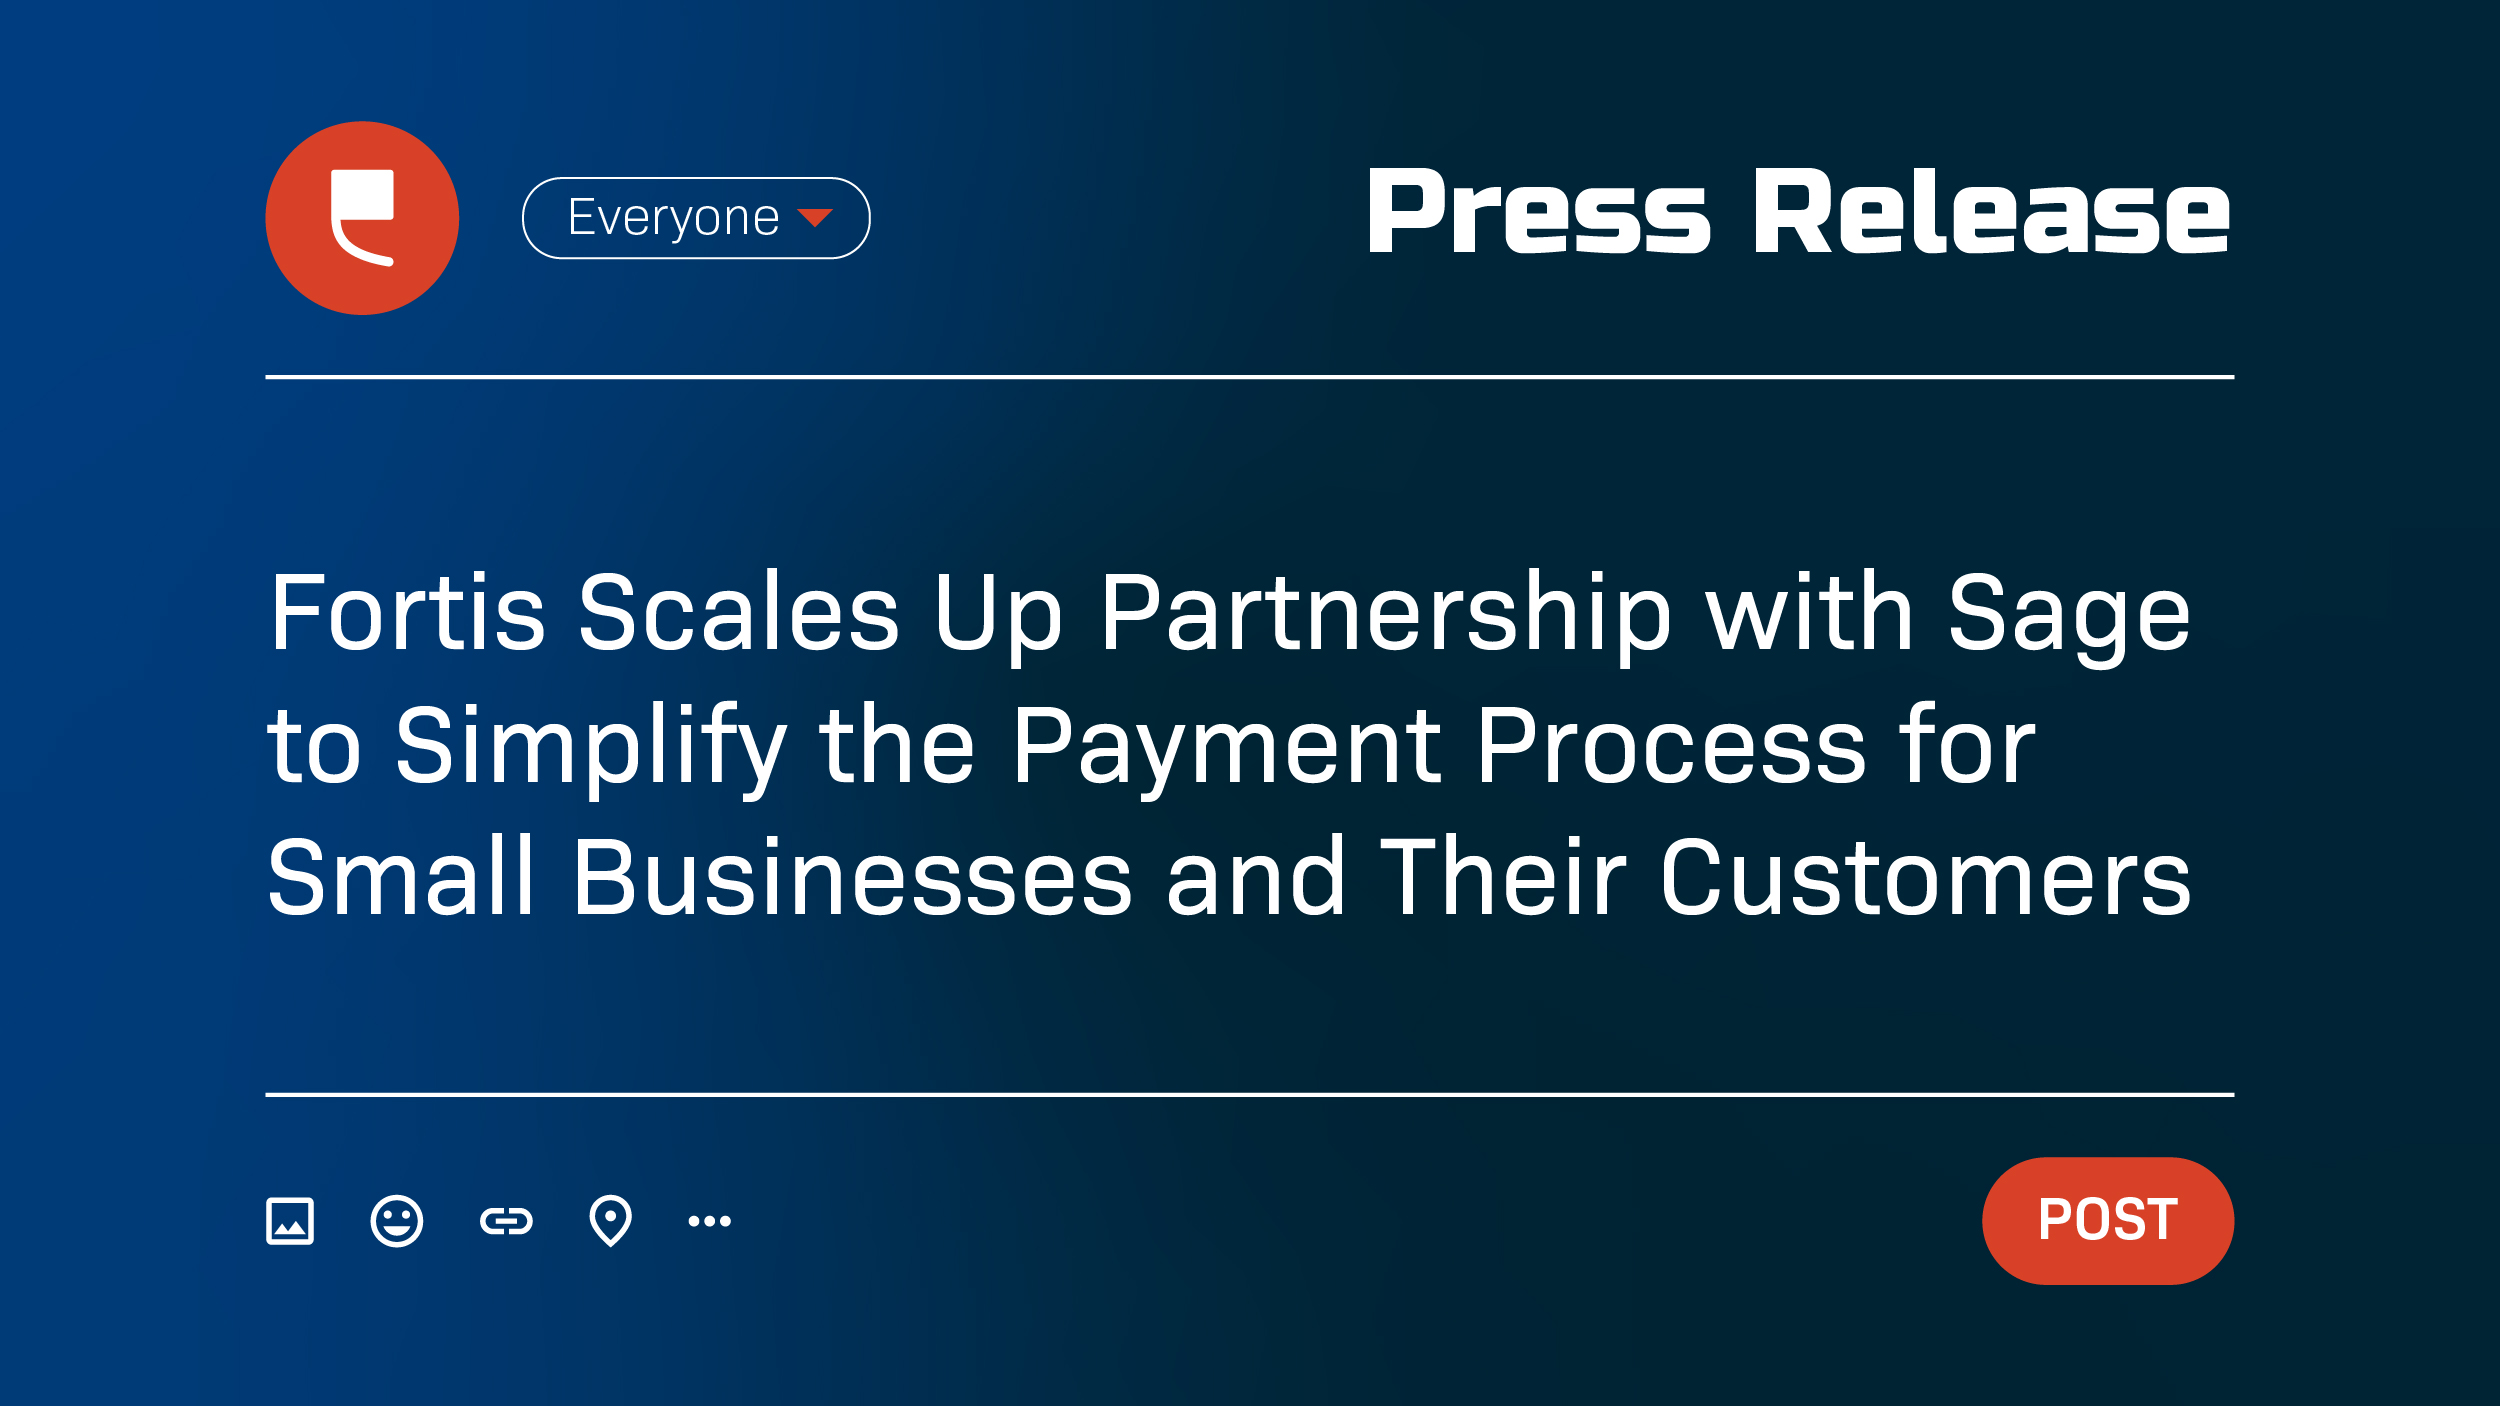 Fortis Scales Up Partnership with Sage to Simplify the Payment Process for Small Businesses and Their Customers - Featured Image